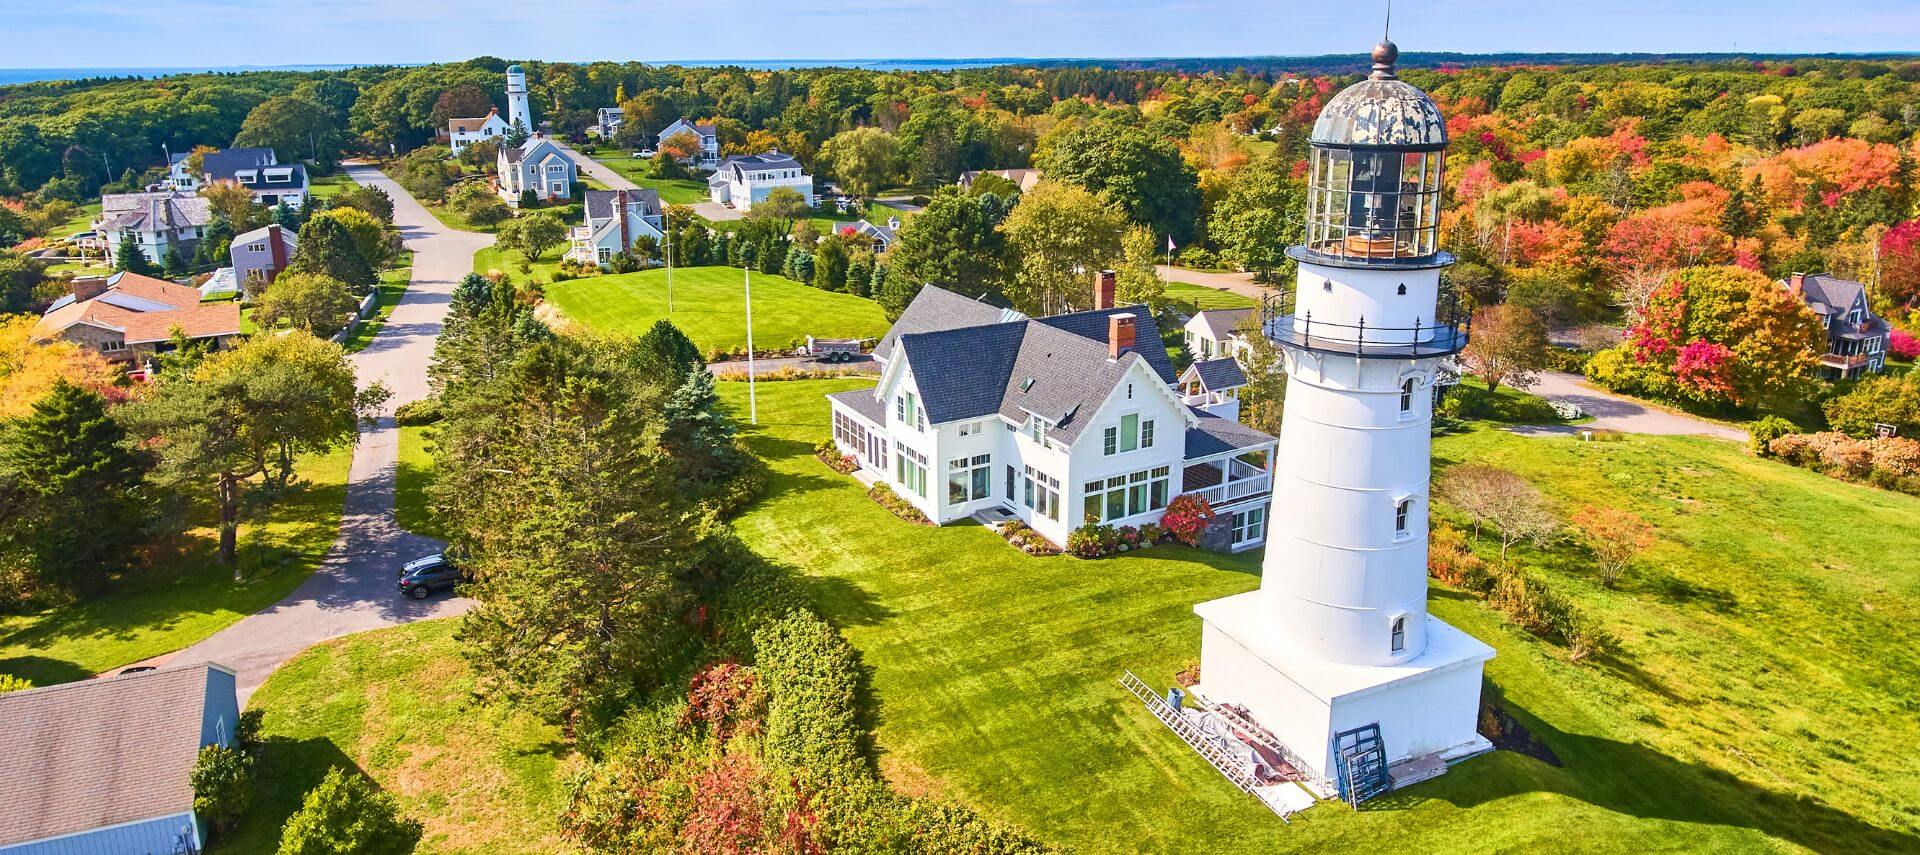 Cape Elizabeth Lighthouse with a view of the turning foliage in the background